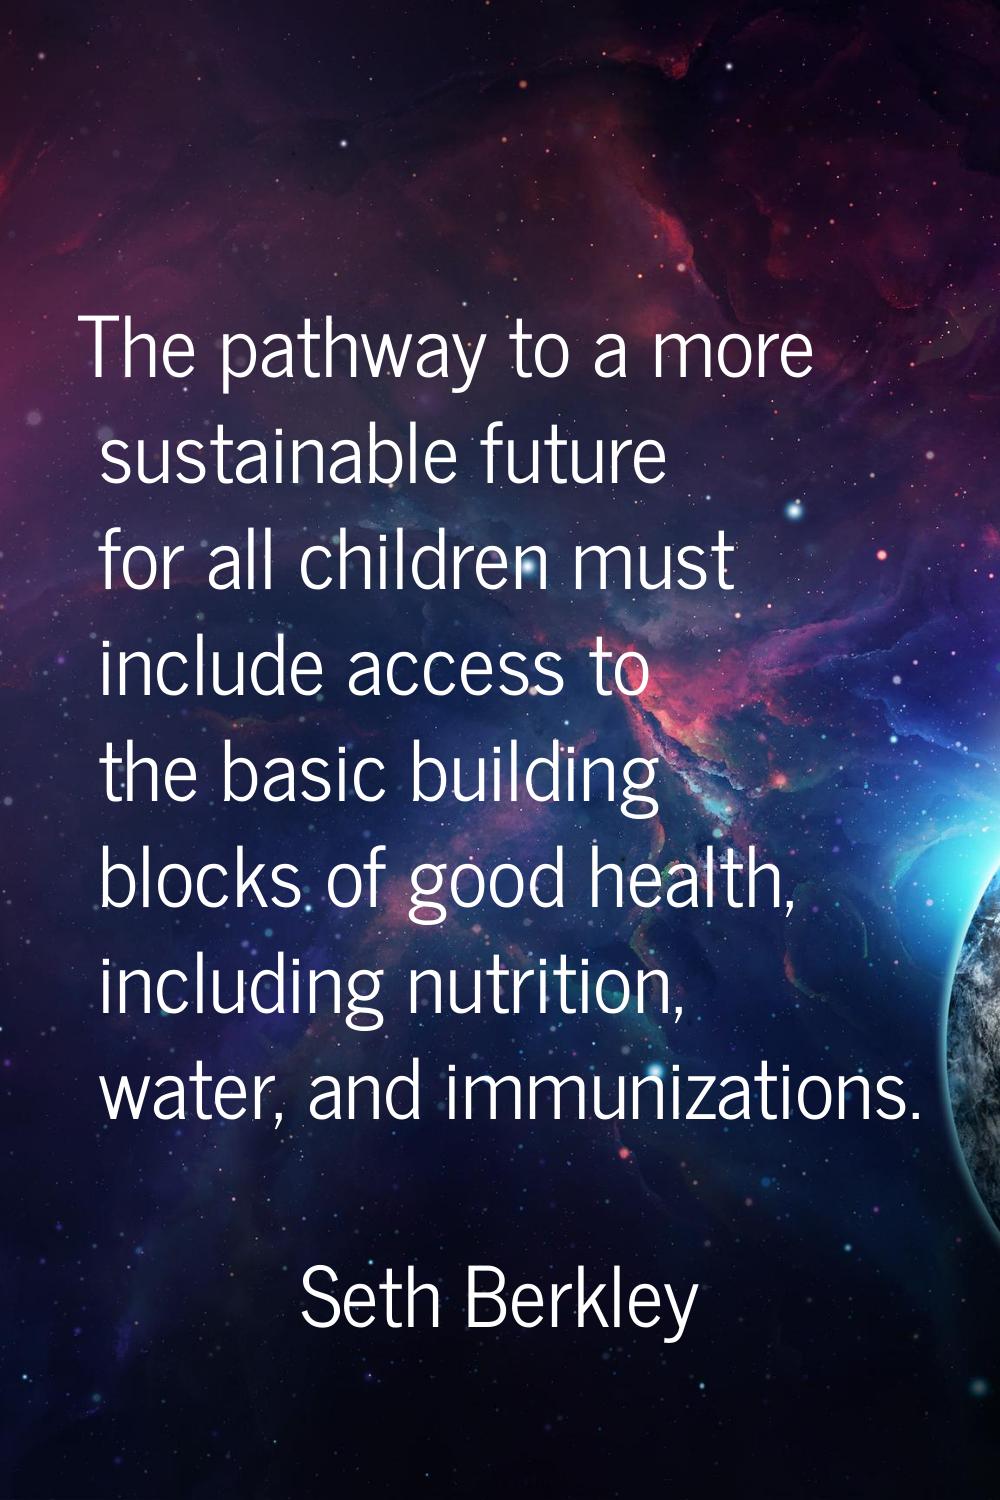 The pathway to a more sustainable future for all children must include access to the basic building